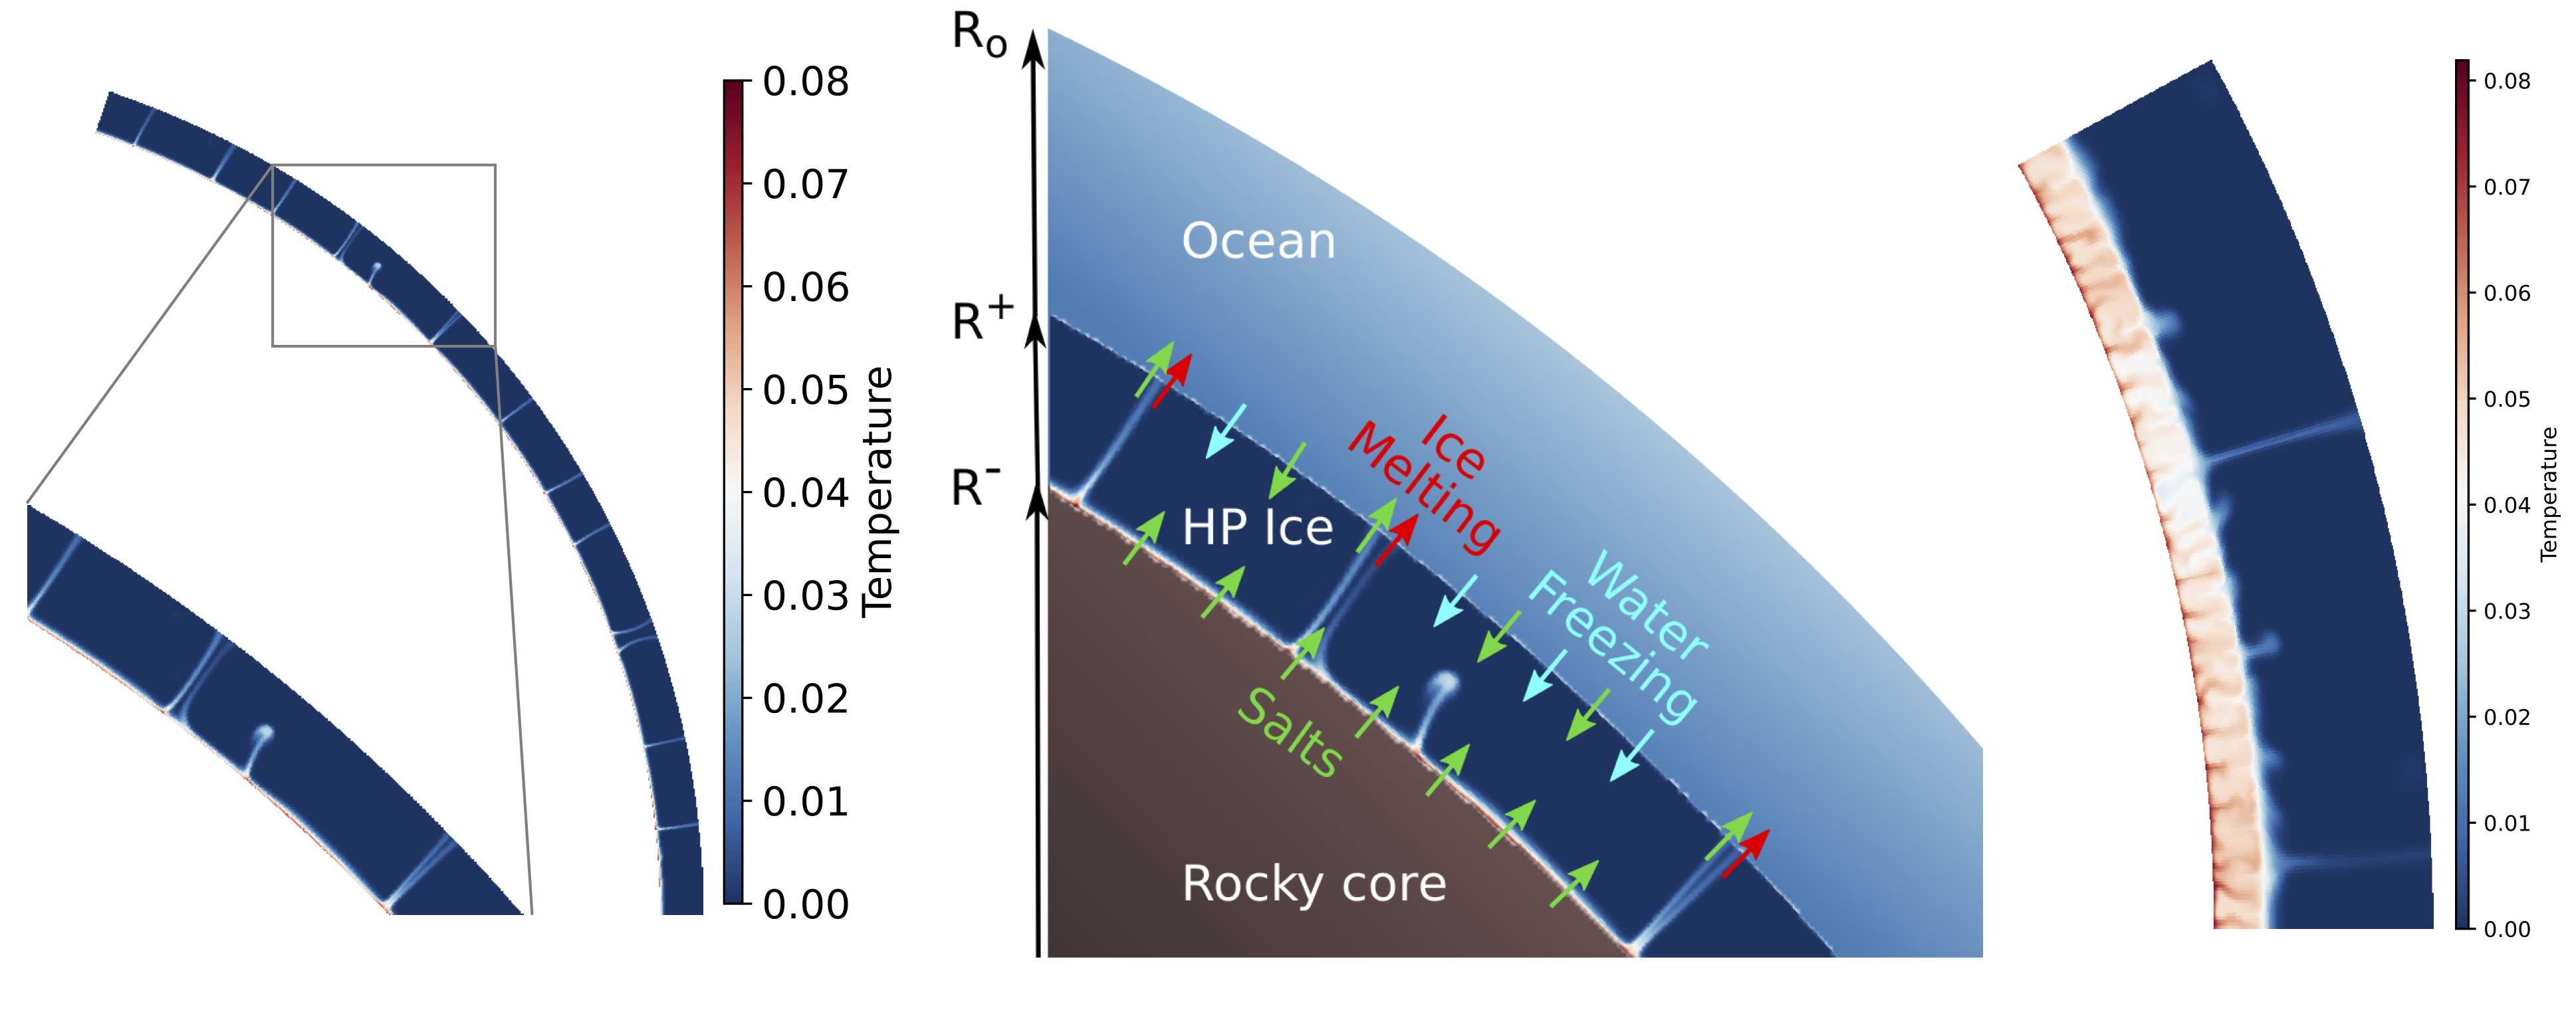 Convection models in HP ice layers